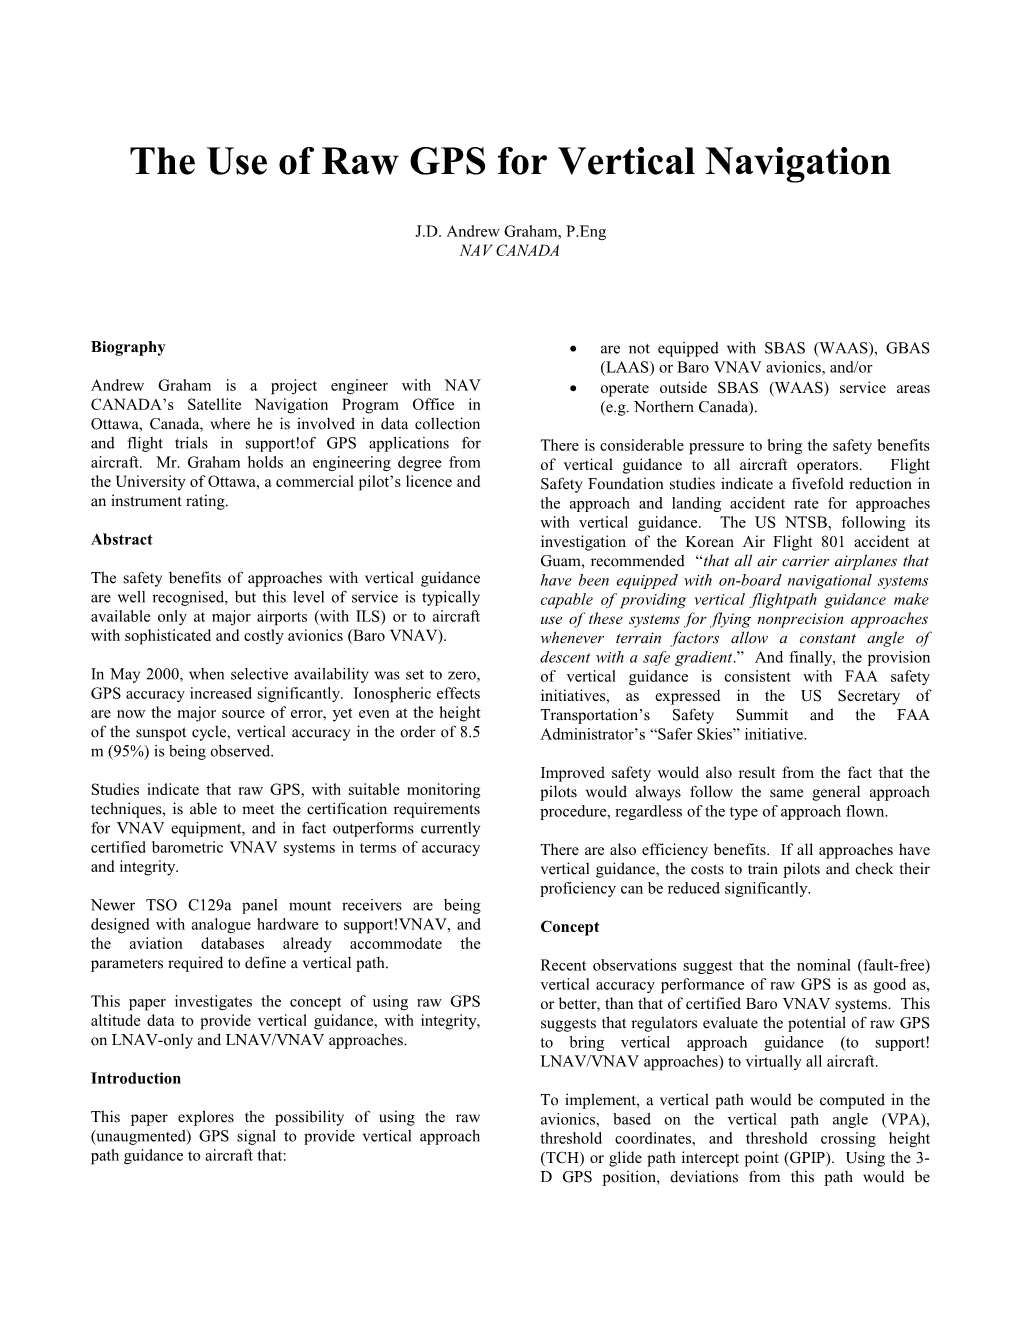 The Use of Raw GPS for Vertical Guidance